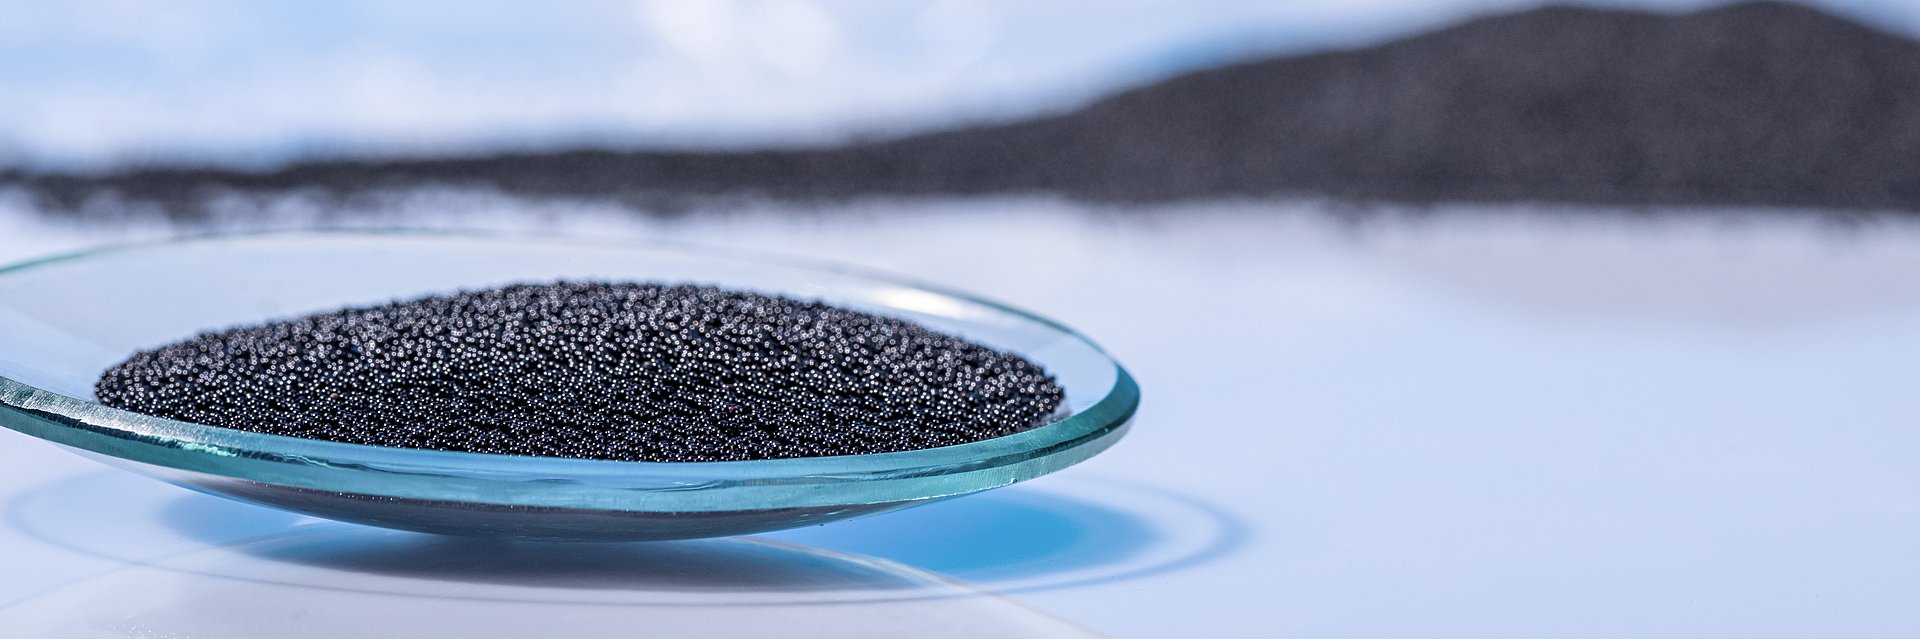 Some activated charcoal or active carbon in a culture dish at IBU-tec for tolling services or material development